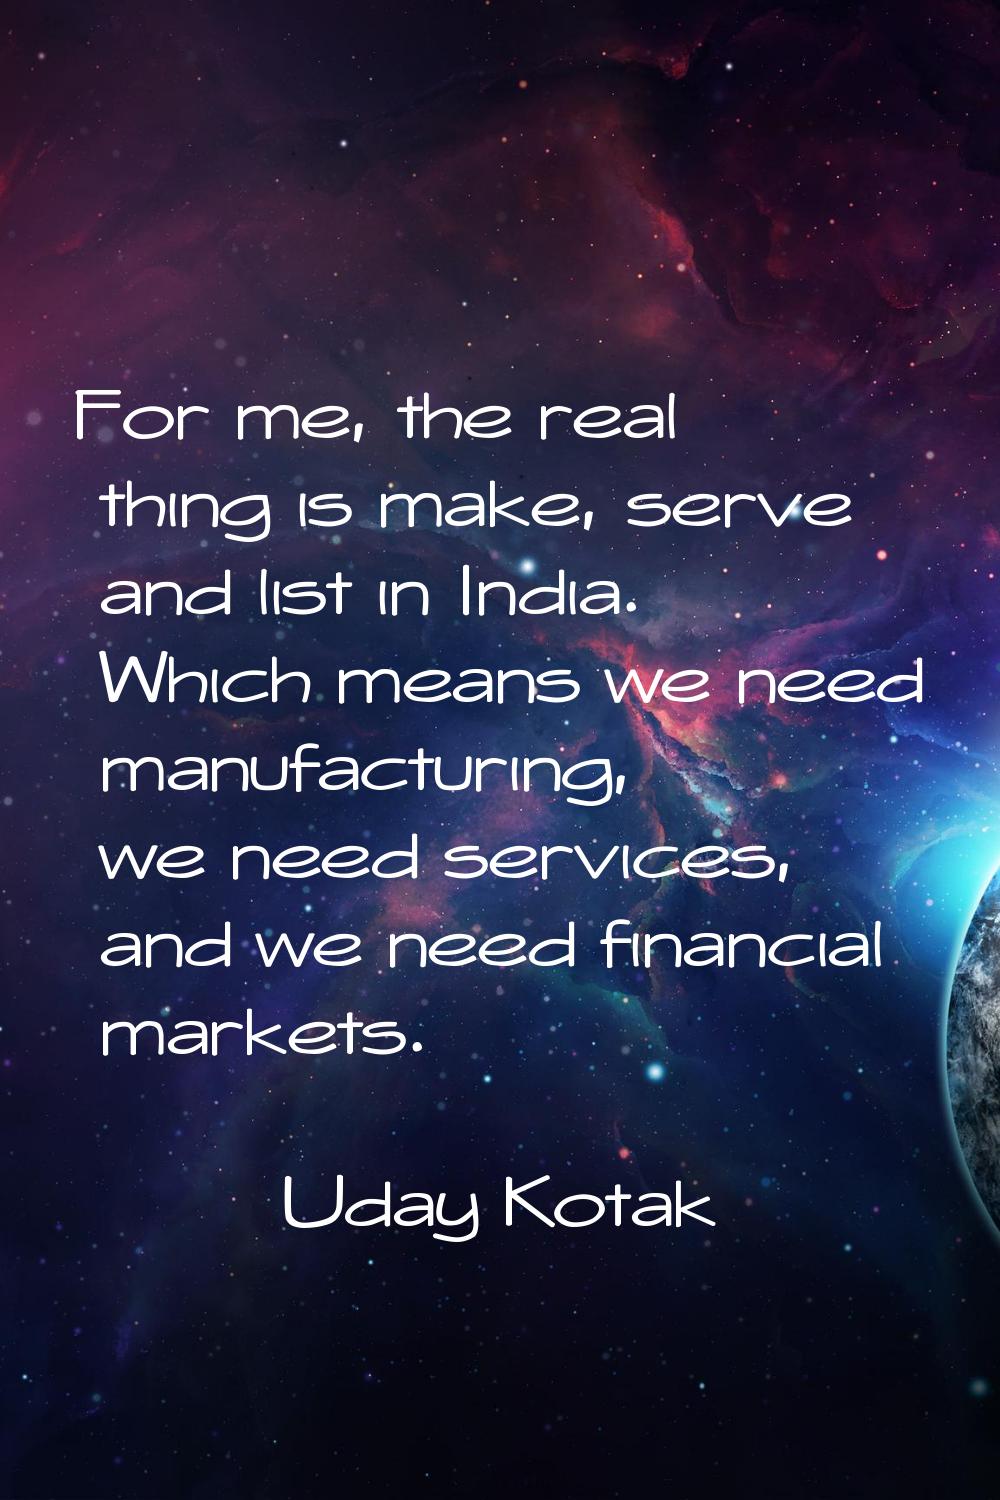 For me, the real thing is make, serve and list in India. Which means we need manufacturing, we need